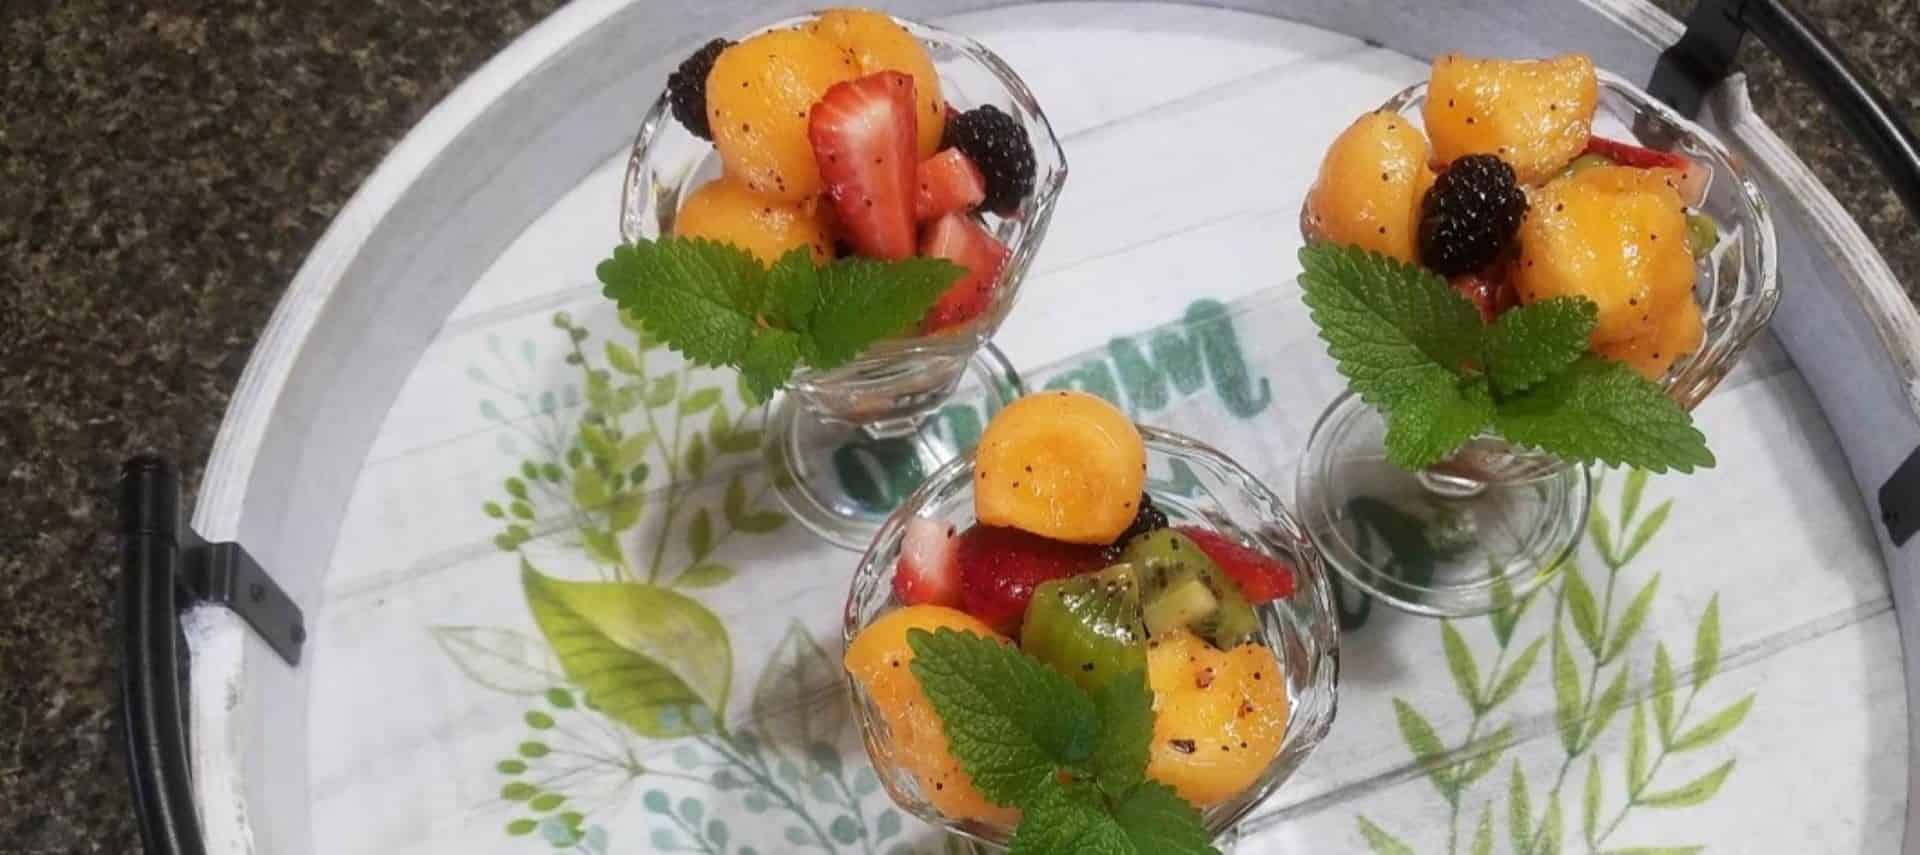 Three glass fruit cups filled with melon balls, sliced strawberries, blackberries, and kiwi